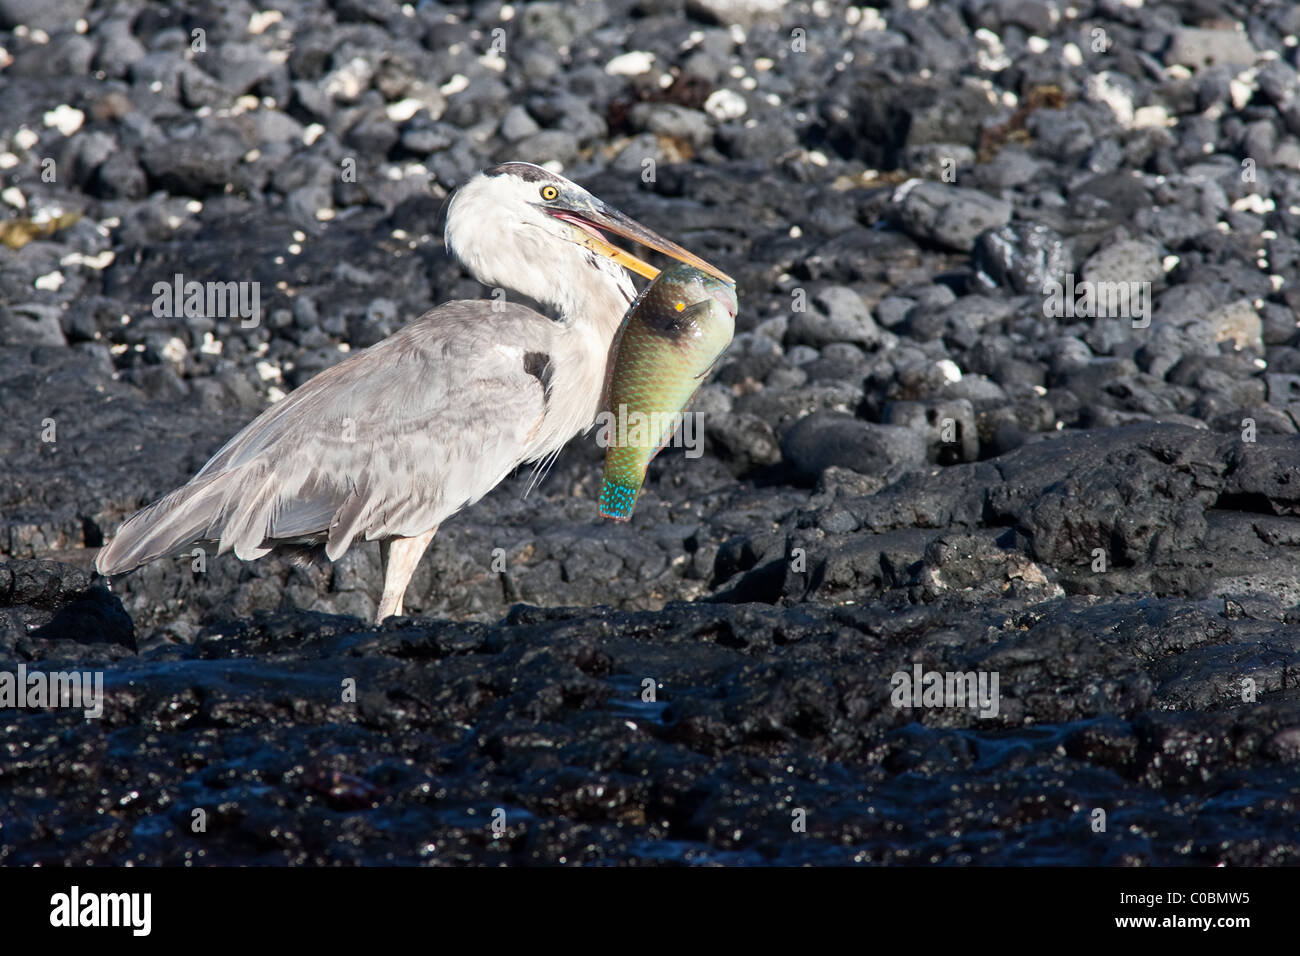 Great Blue Heron with a recently caught Parrot-fish in its beak, Isabela island, Galapagos, Ecuador Stock Photo